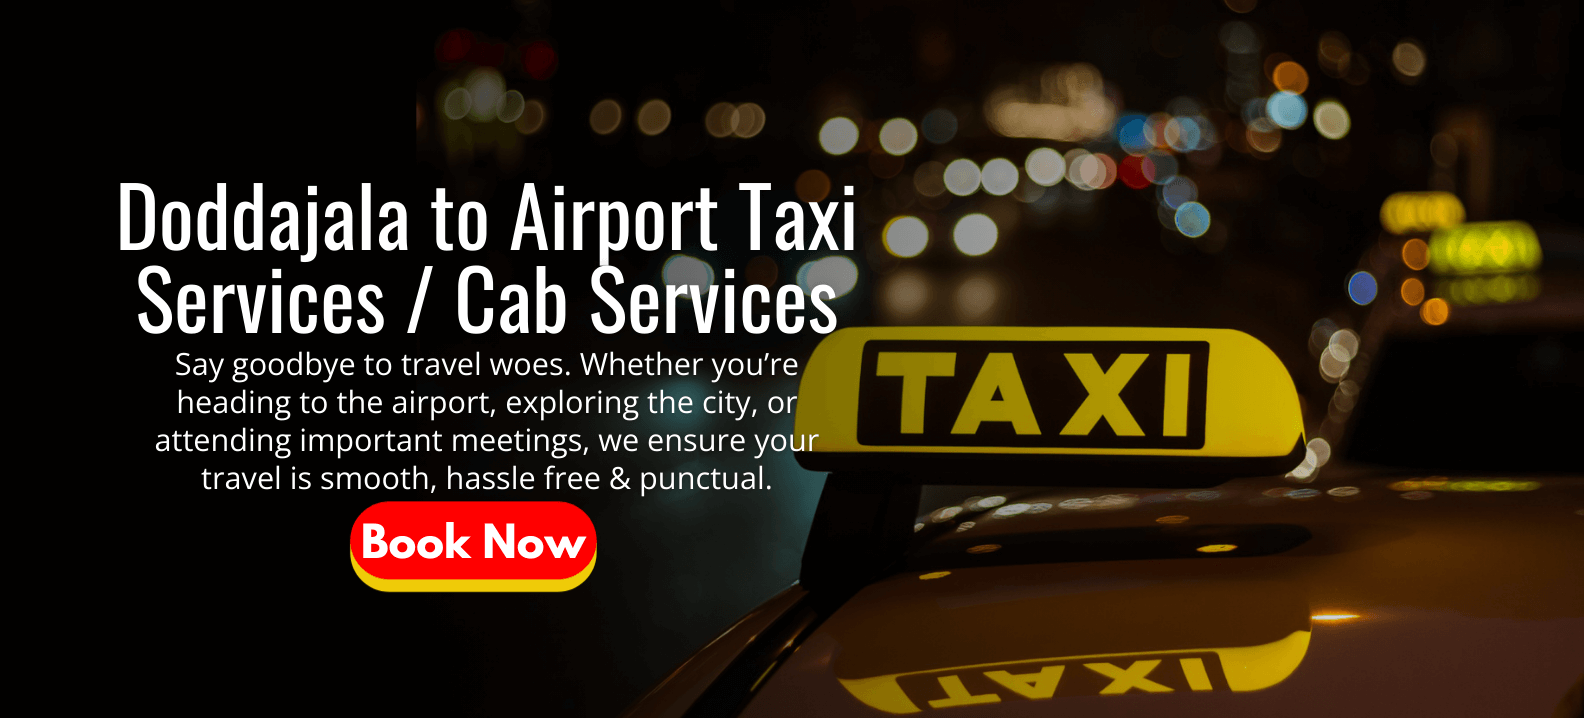 Doddajala to Airport Taxi Services _ Cab Services